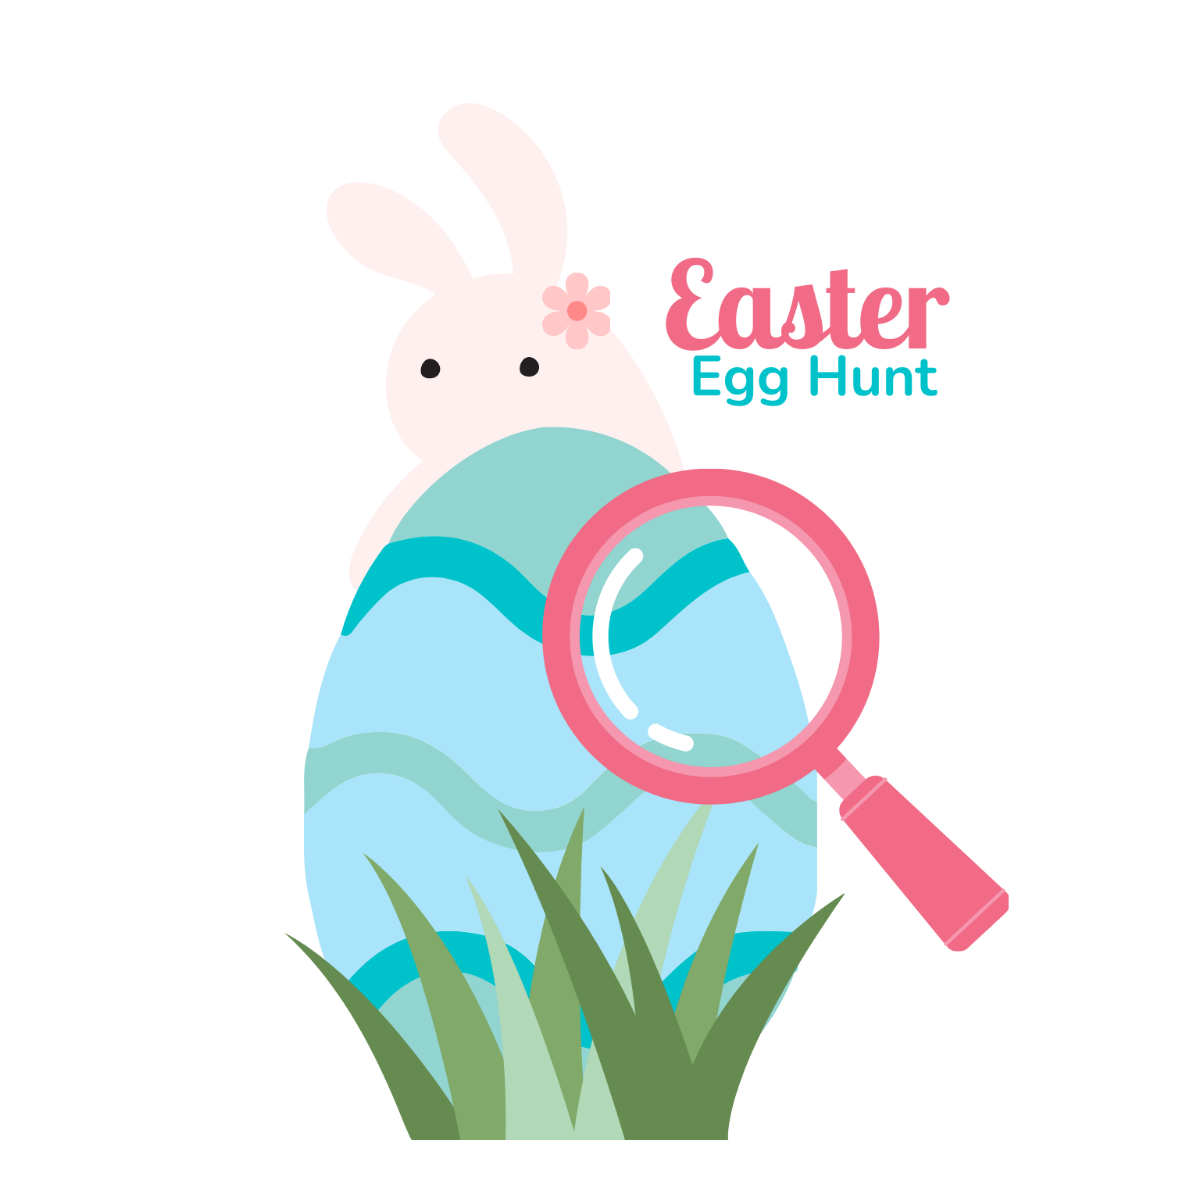 Free Easter Egg Hunt ClipArt Template